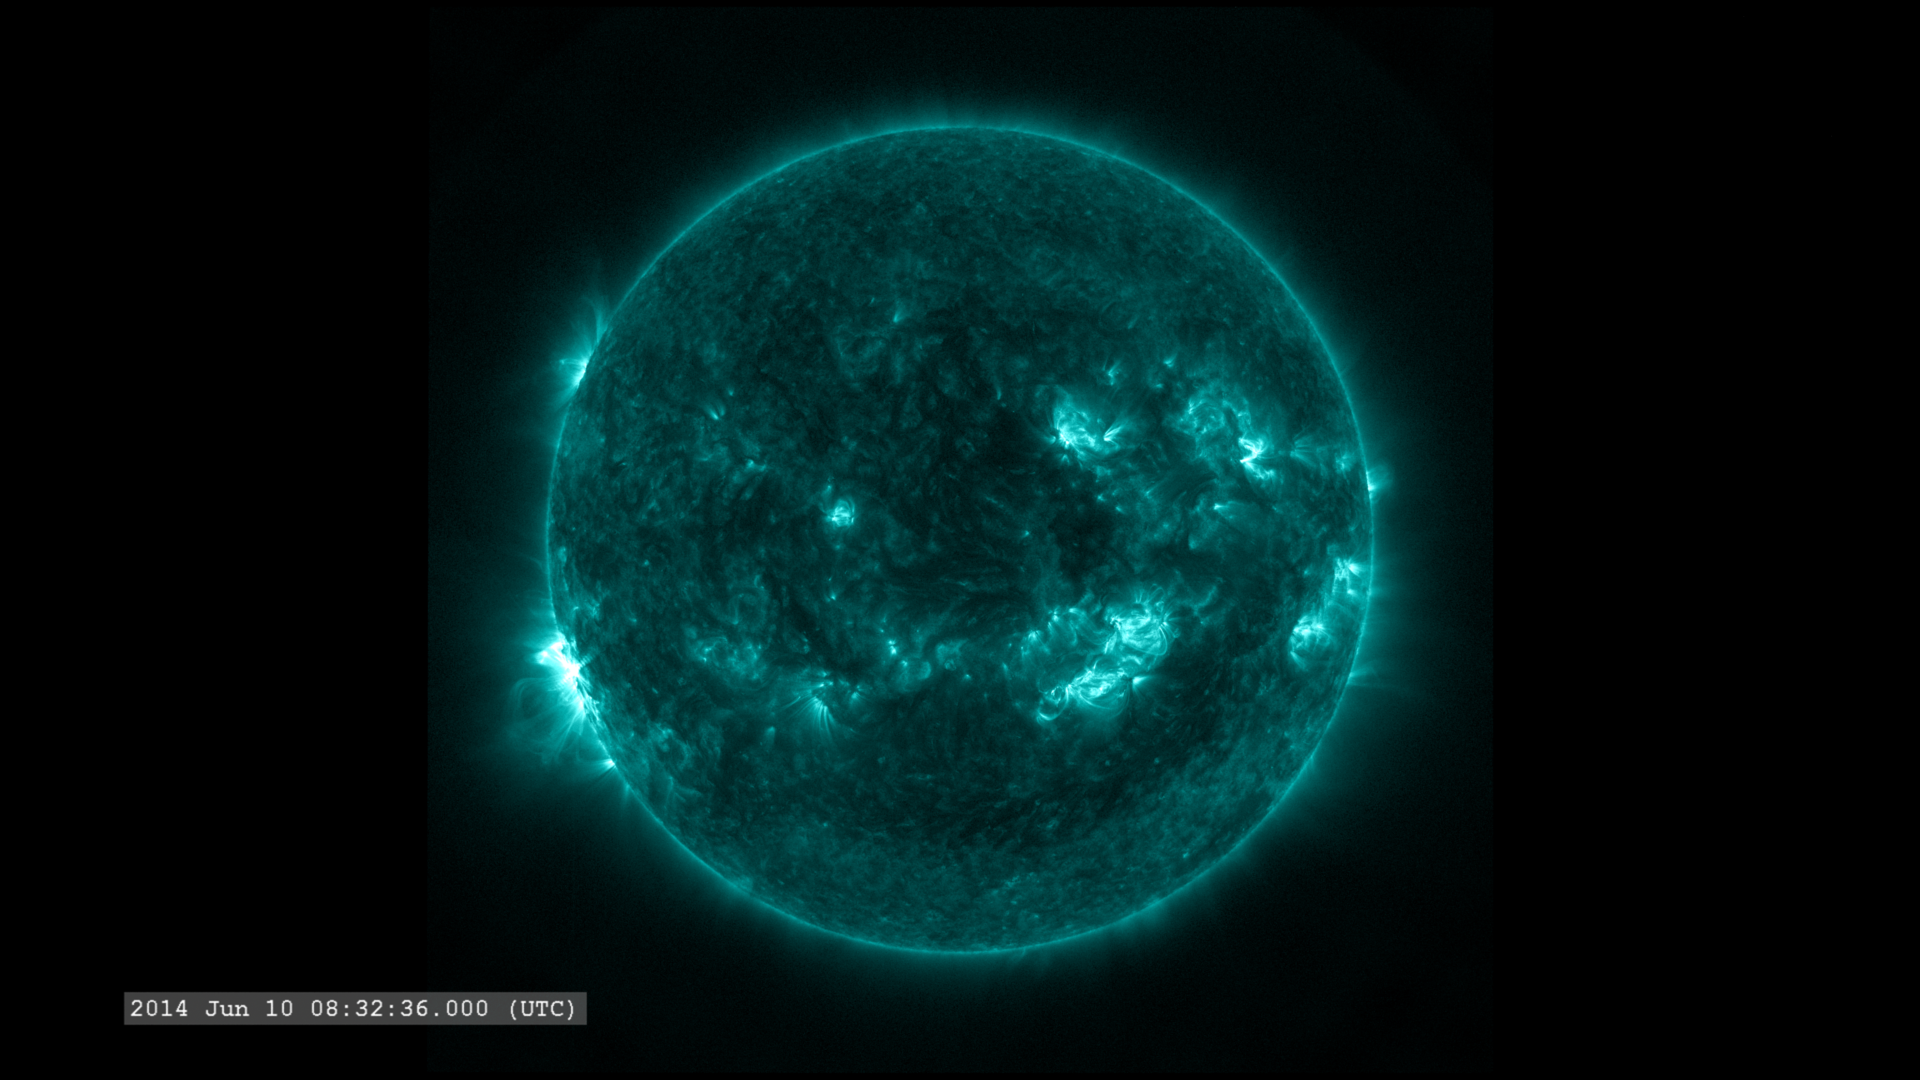 Full disk HD movie in the SDO 131 &aring;ngstrom filter.